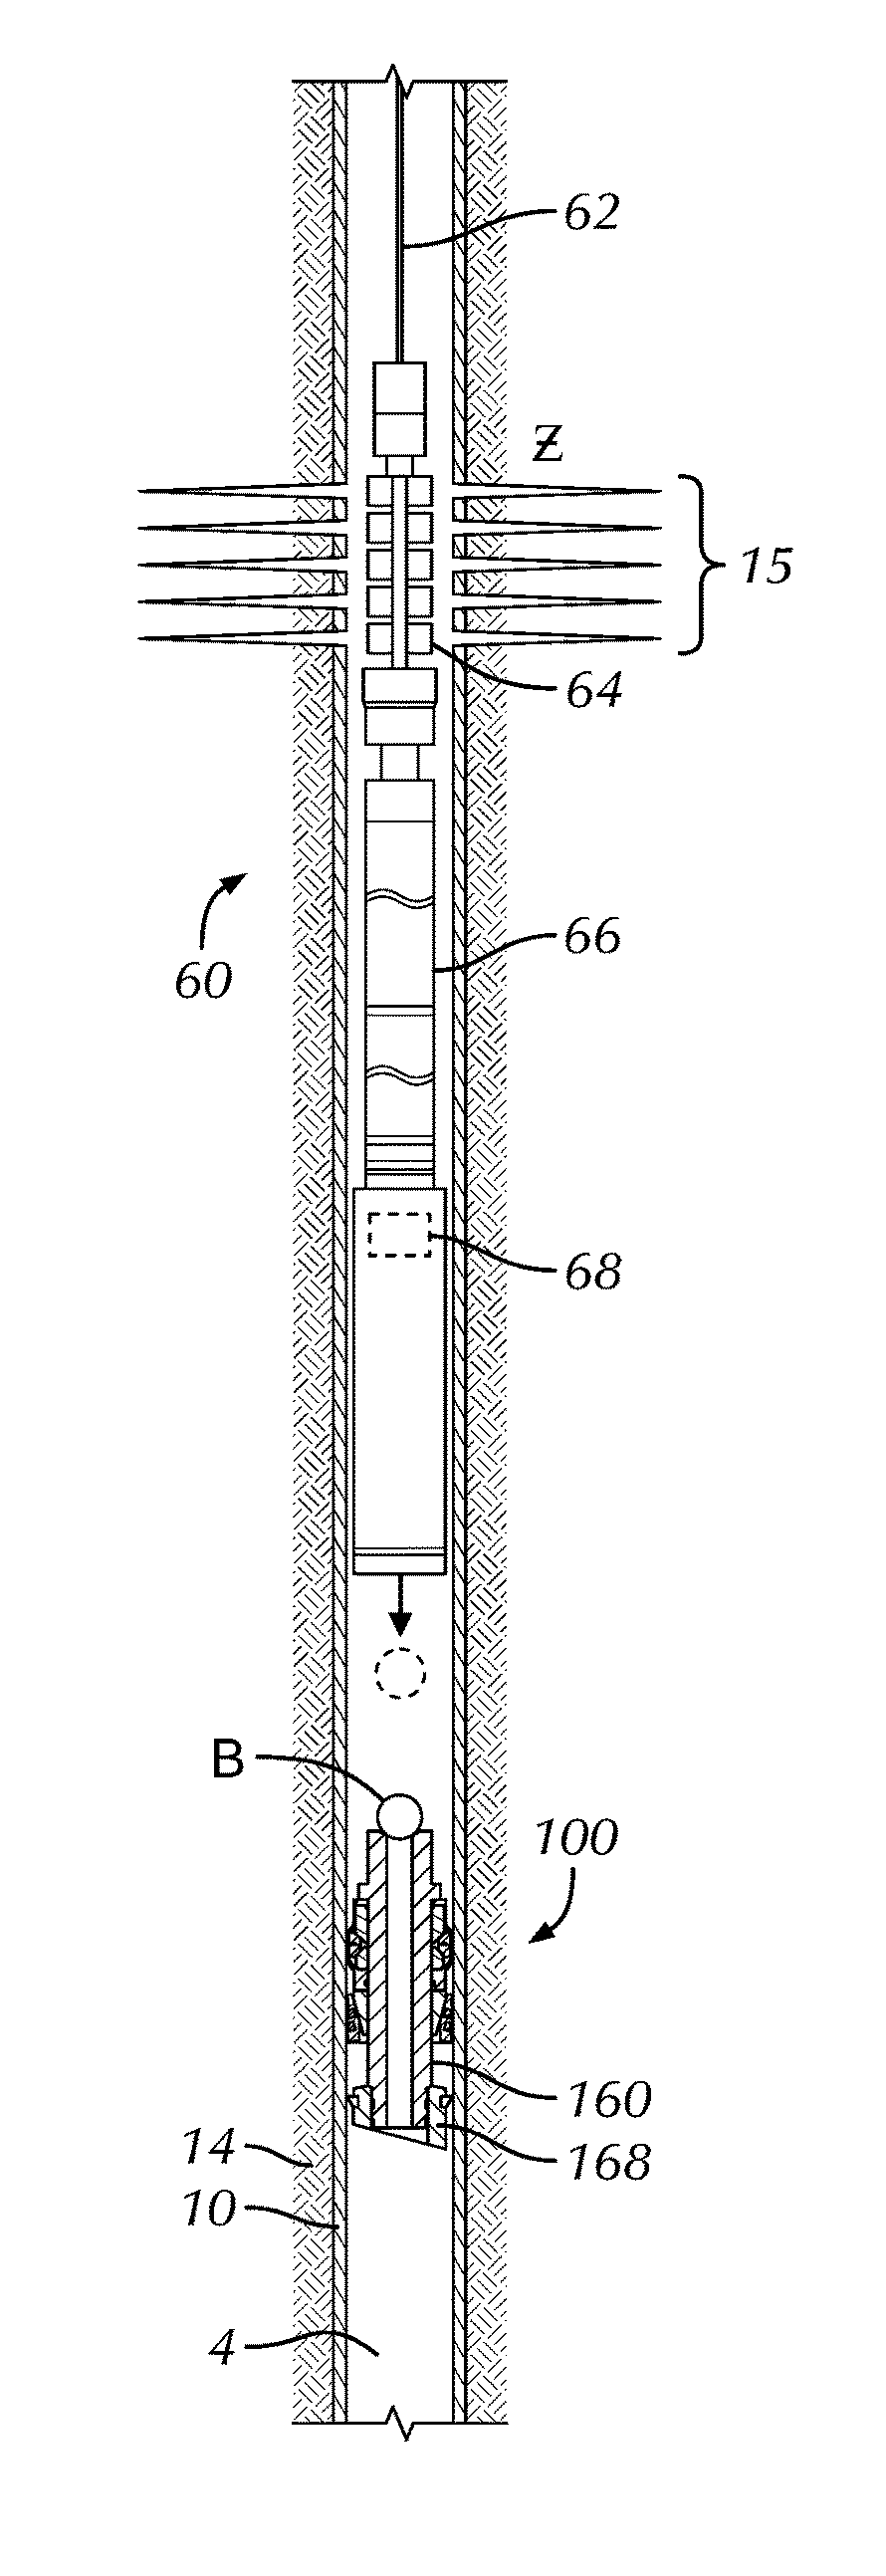 Self-Removing Plug for Pressure Isolation in Tubing of Well